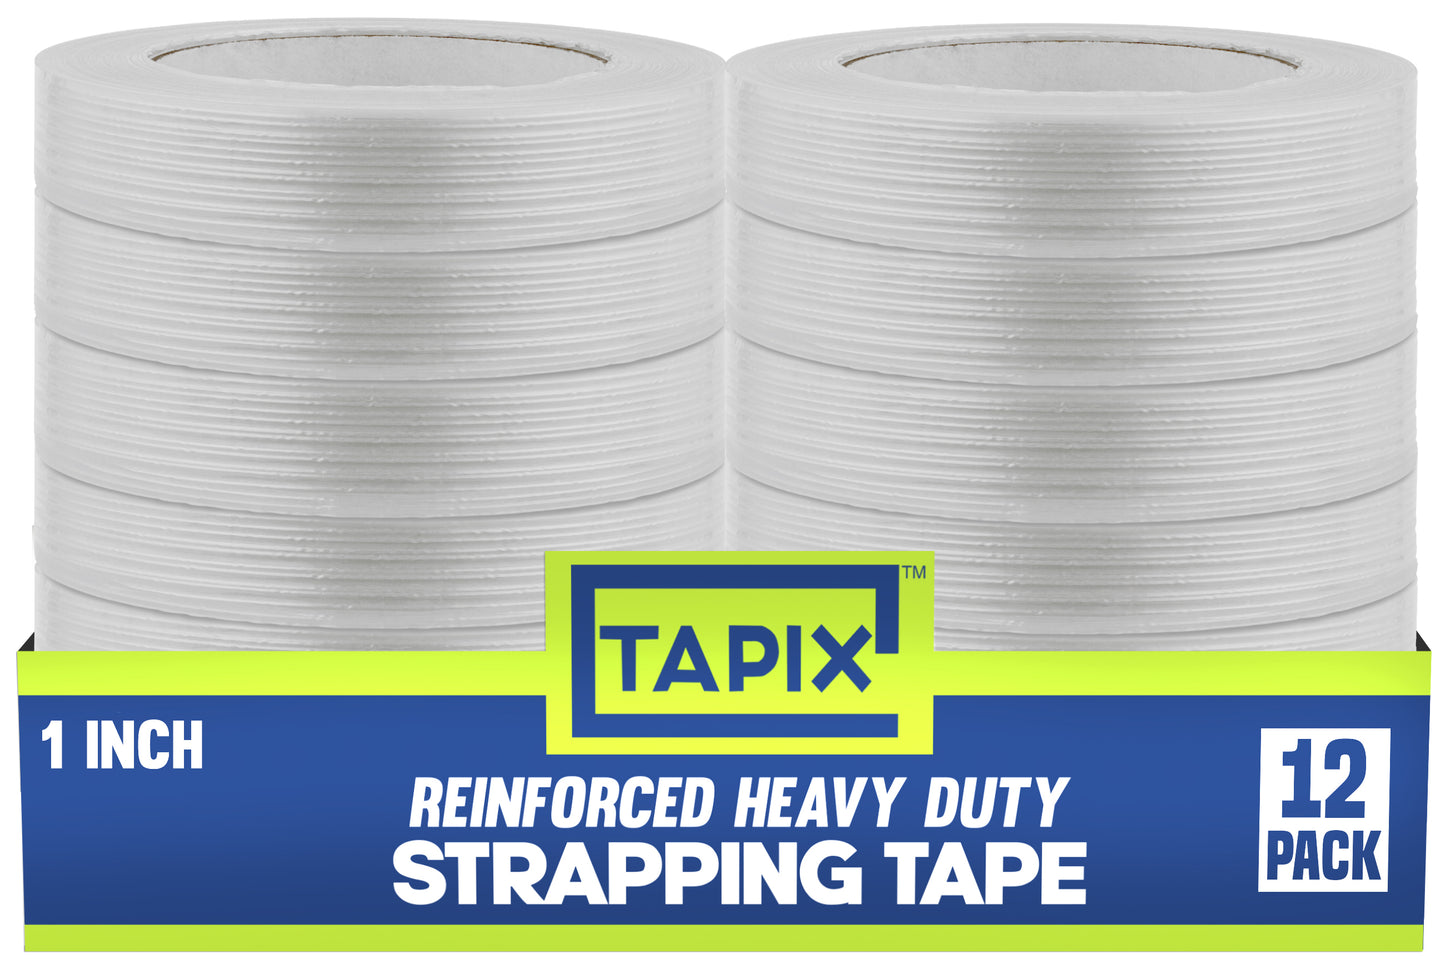 Strapping Tape 1 inch x 60 yds (12 Pack)